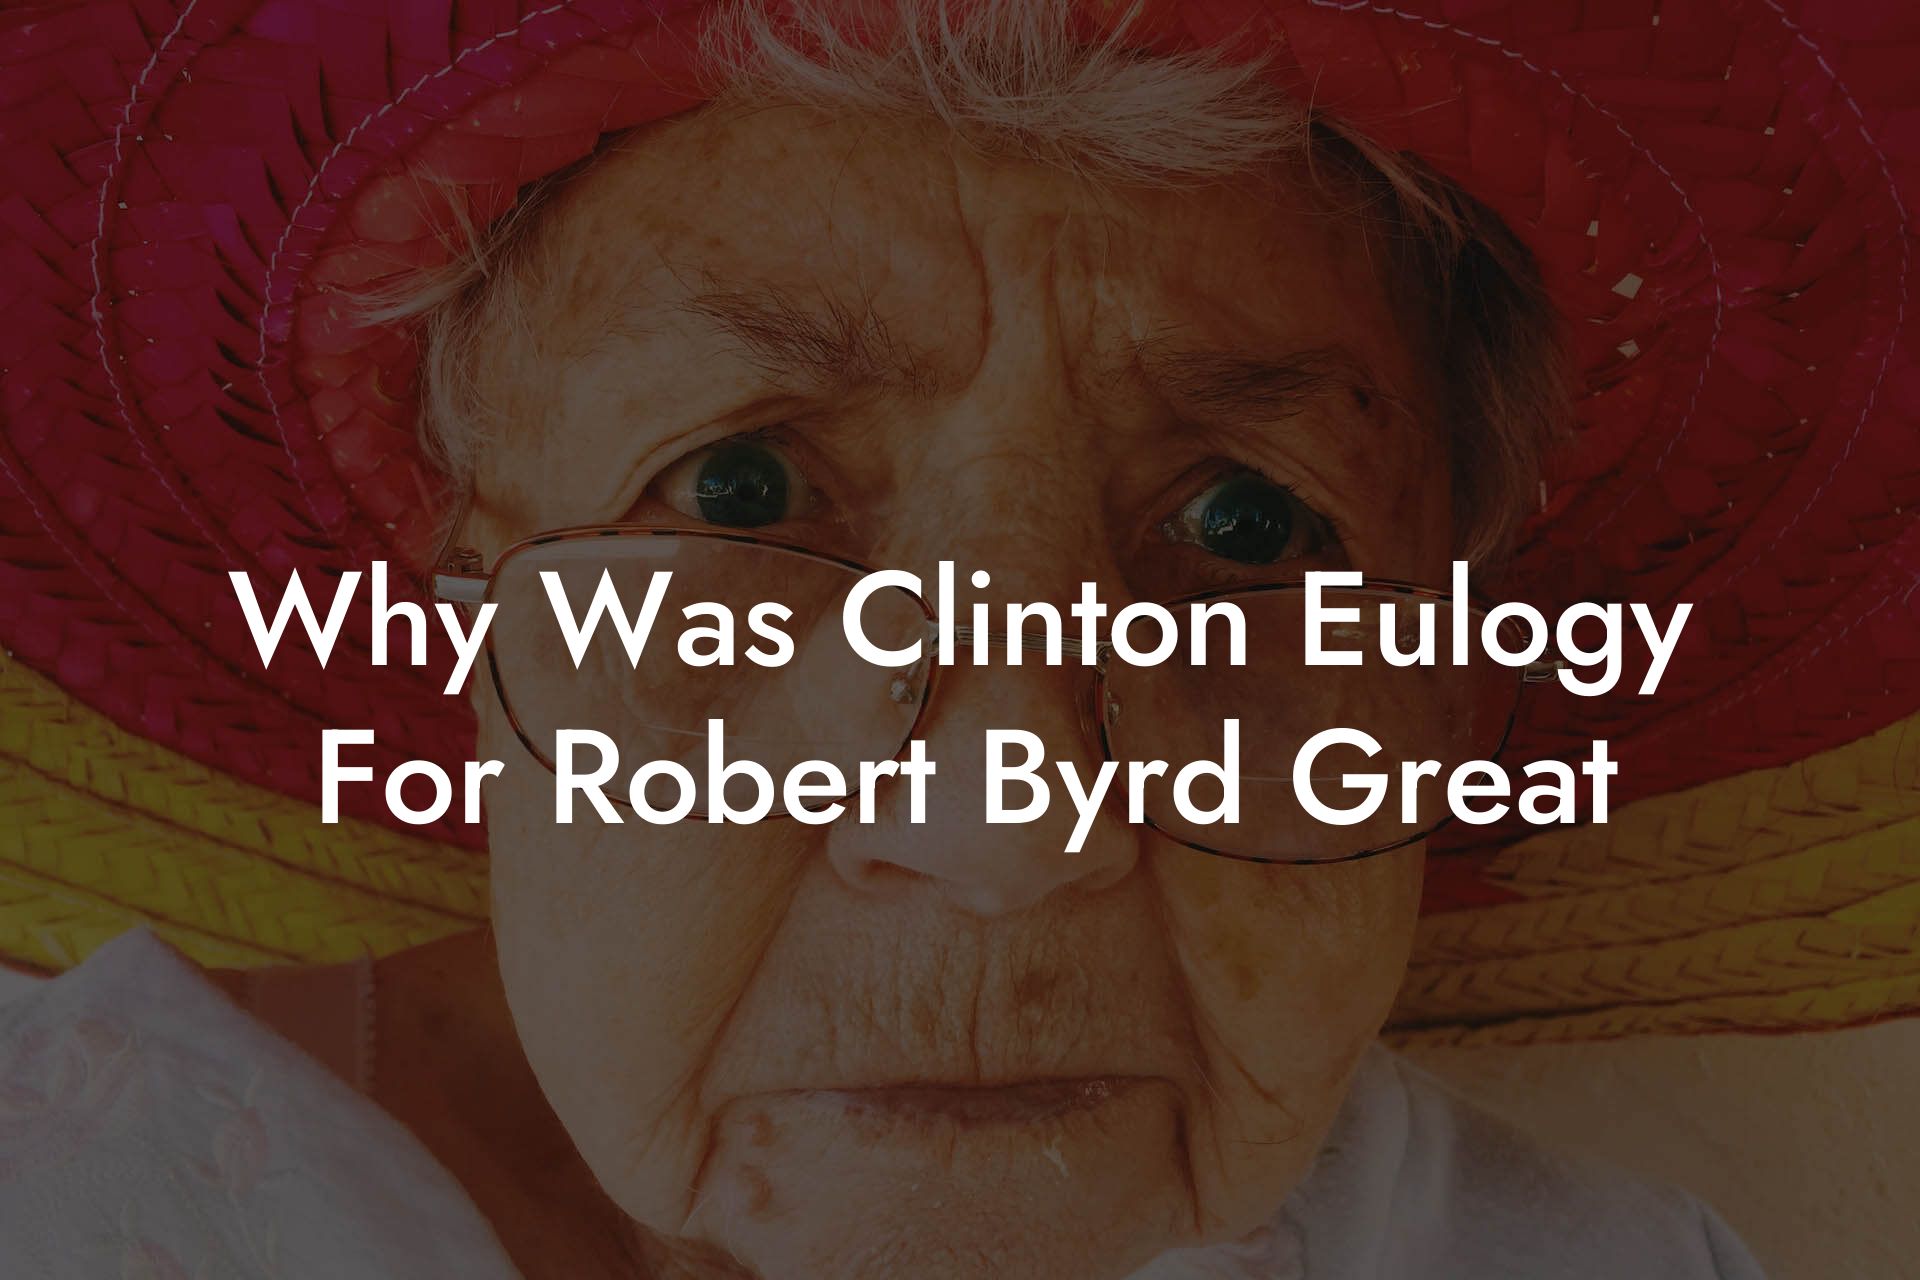 Why Was Clinton Eulogy For Robert Byrd Great